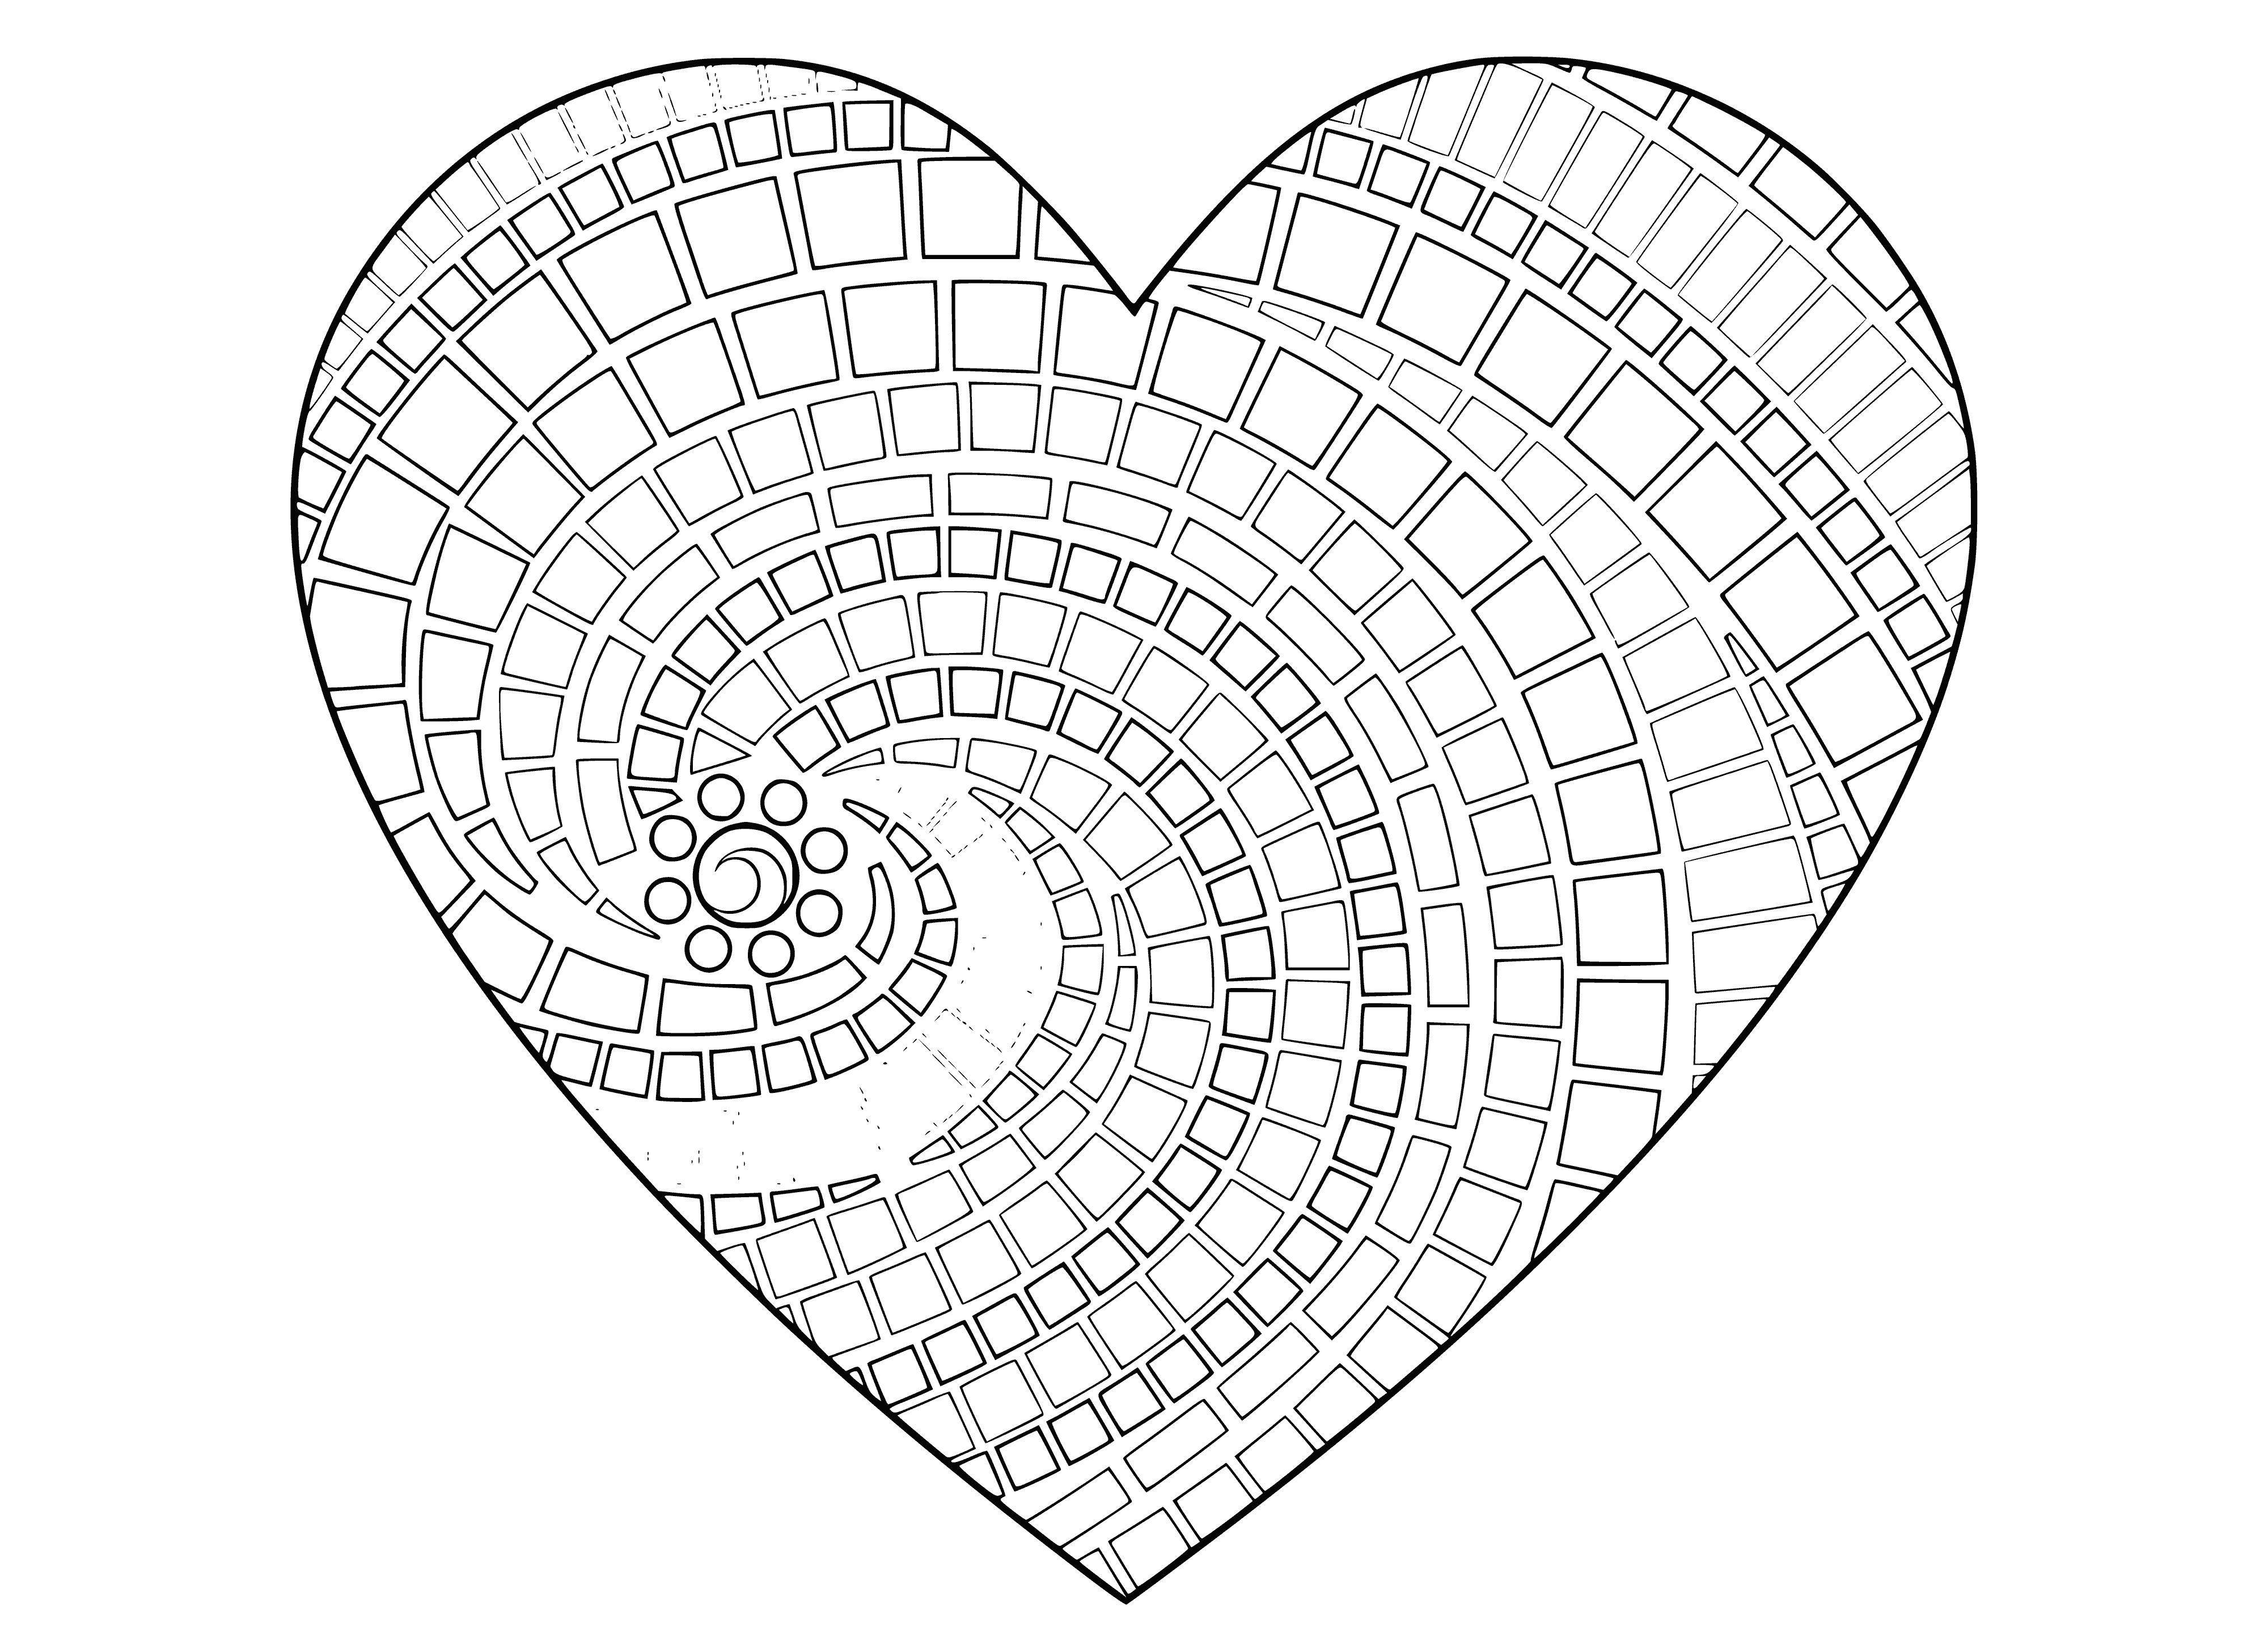 coloring page: Symbol of love - heart, often given on Valentine's Day, with ornate design.